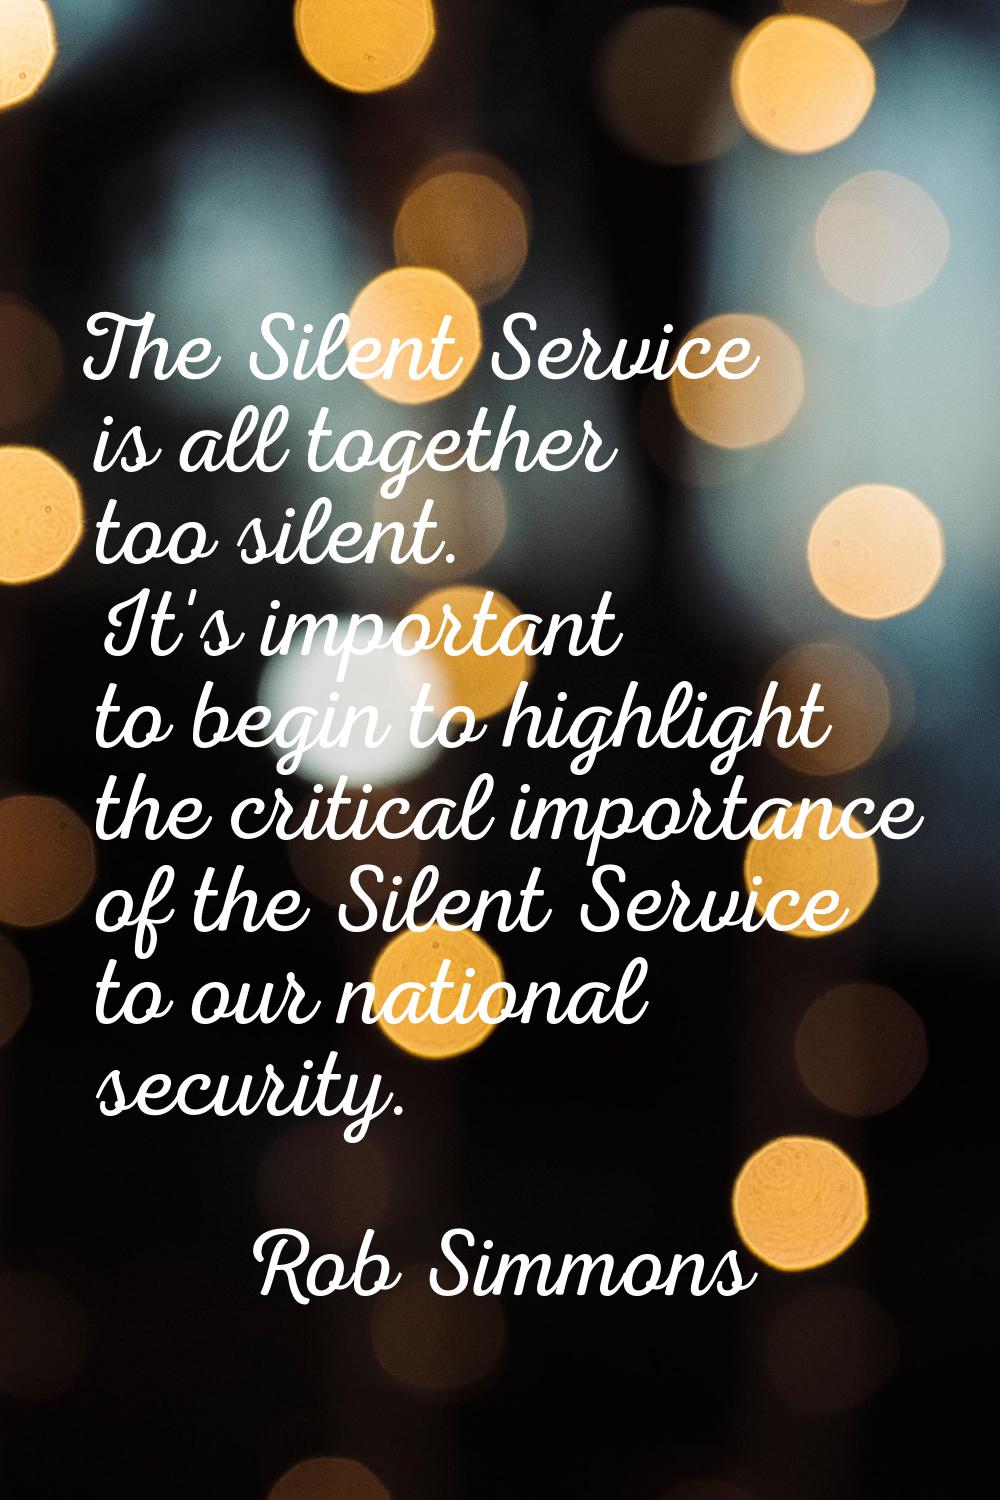 The Silent Service is all together too silent. It's important to begin to highlight the critical im